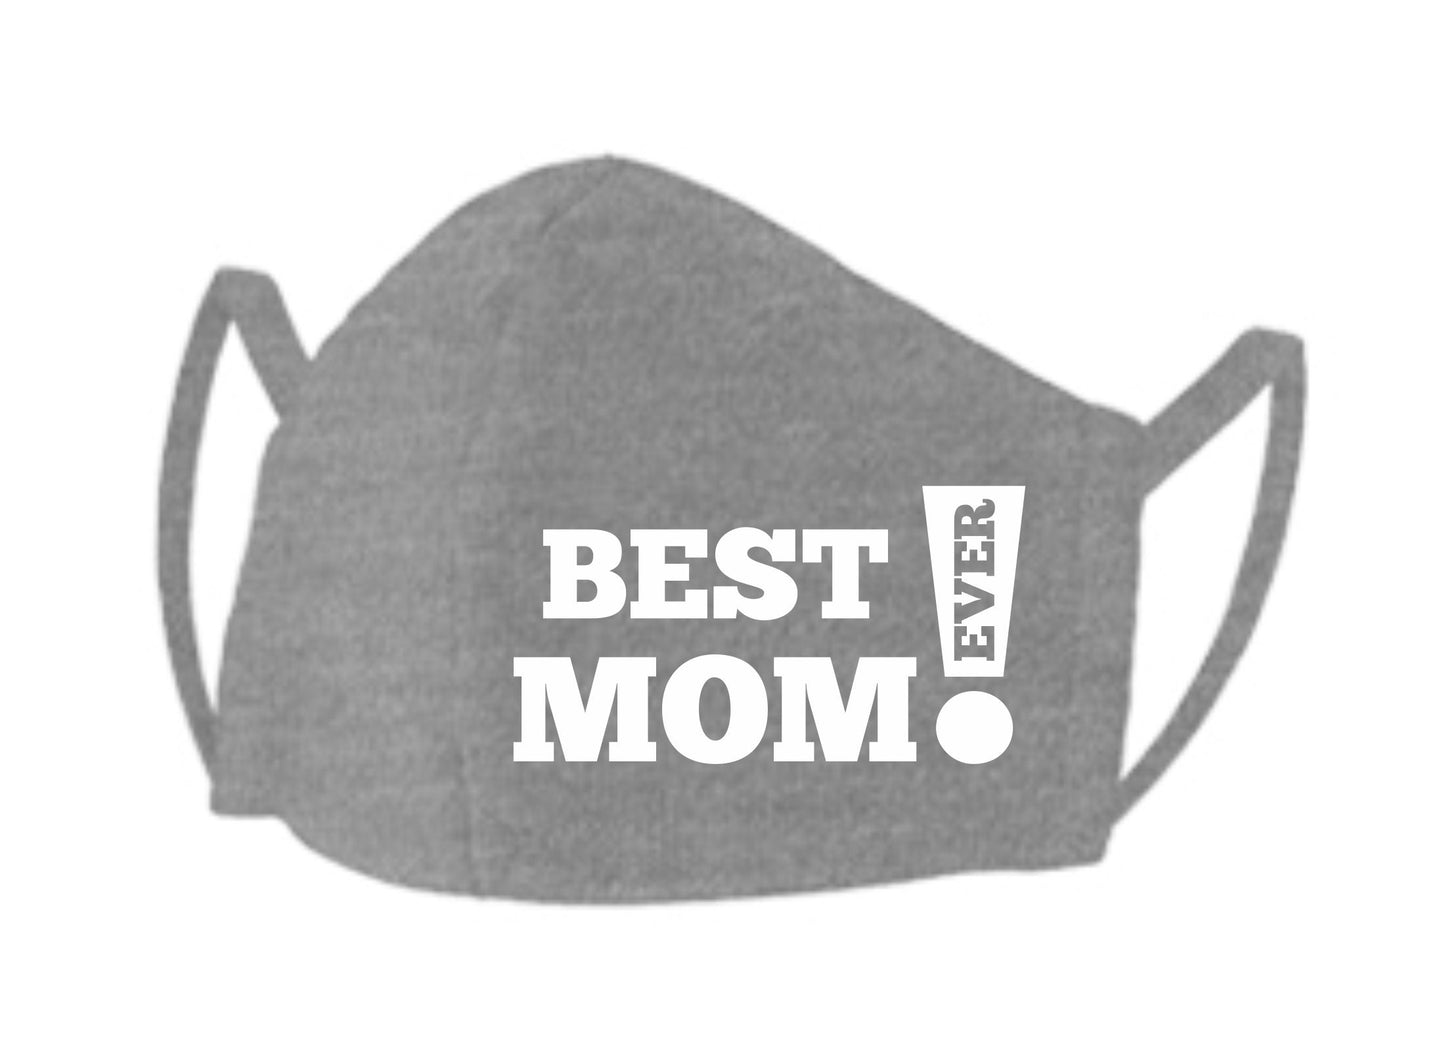 Unisex Face Mask With Nose Wire and Filter Pocket, Best Mom Ever, Gift for Her, Stay Safe, Reusable, Washable, Cute Saying, Comfortable